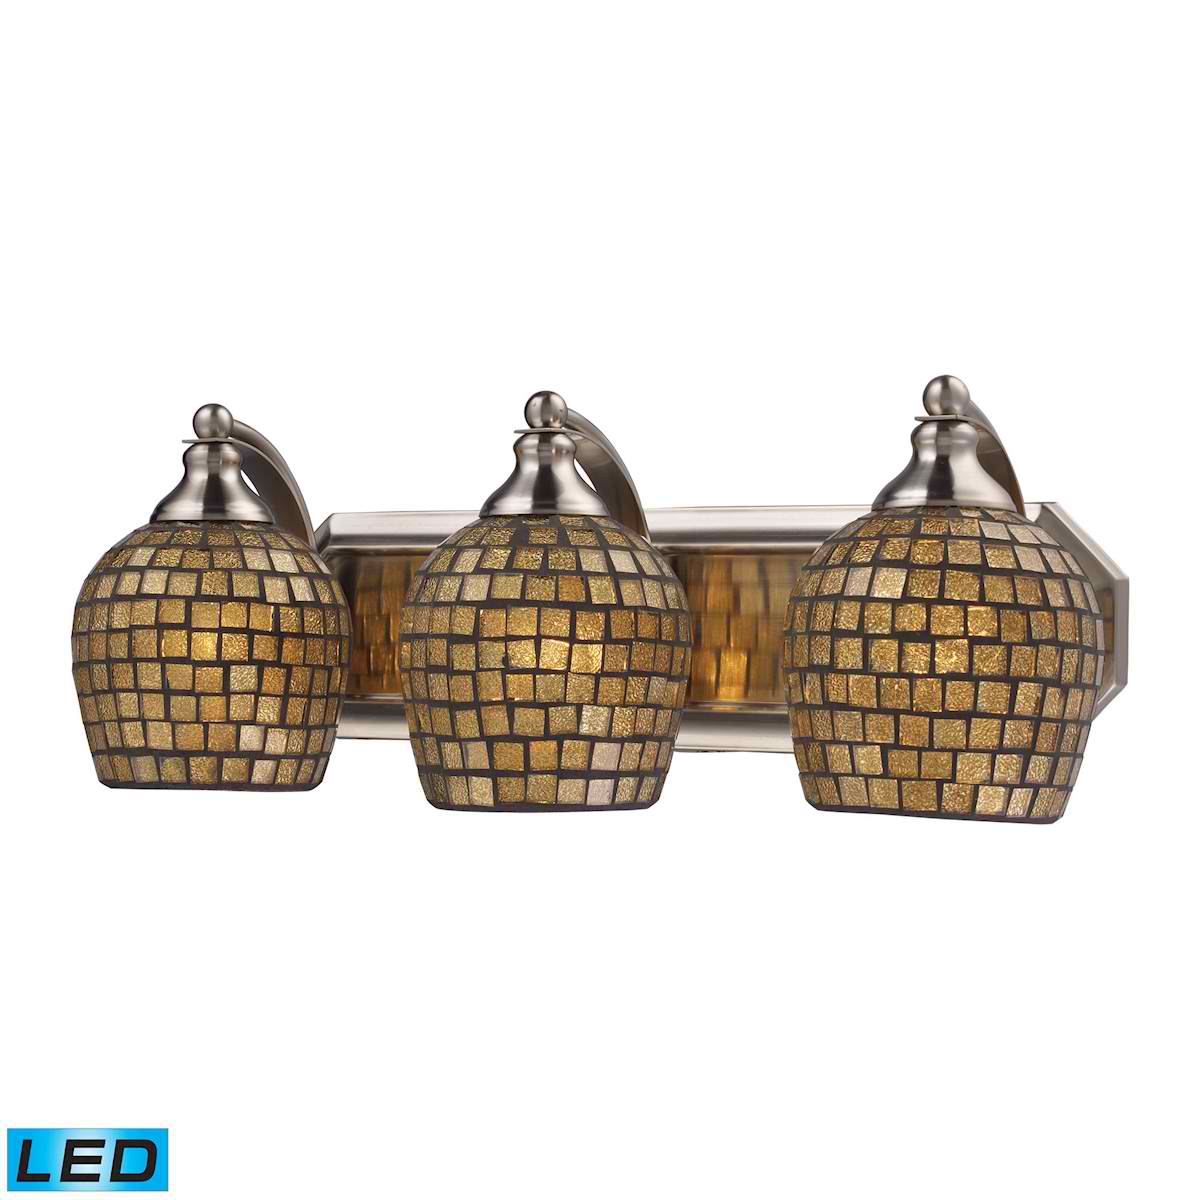 3 Light Vanity in Satin Nickel and Gold Mosaic Glass - LED, 800 Lumens (2400 Lumens Total) with Full Scale